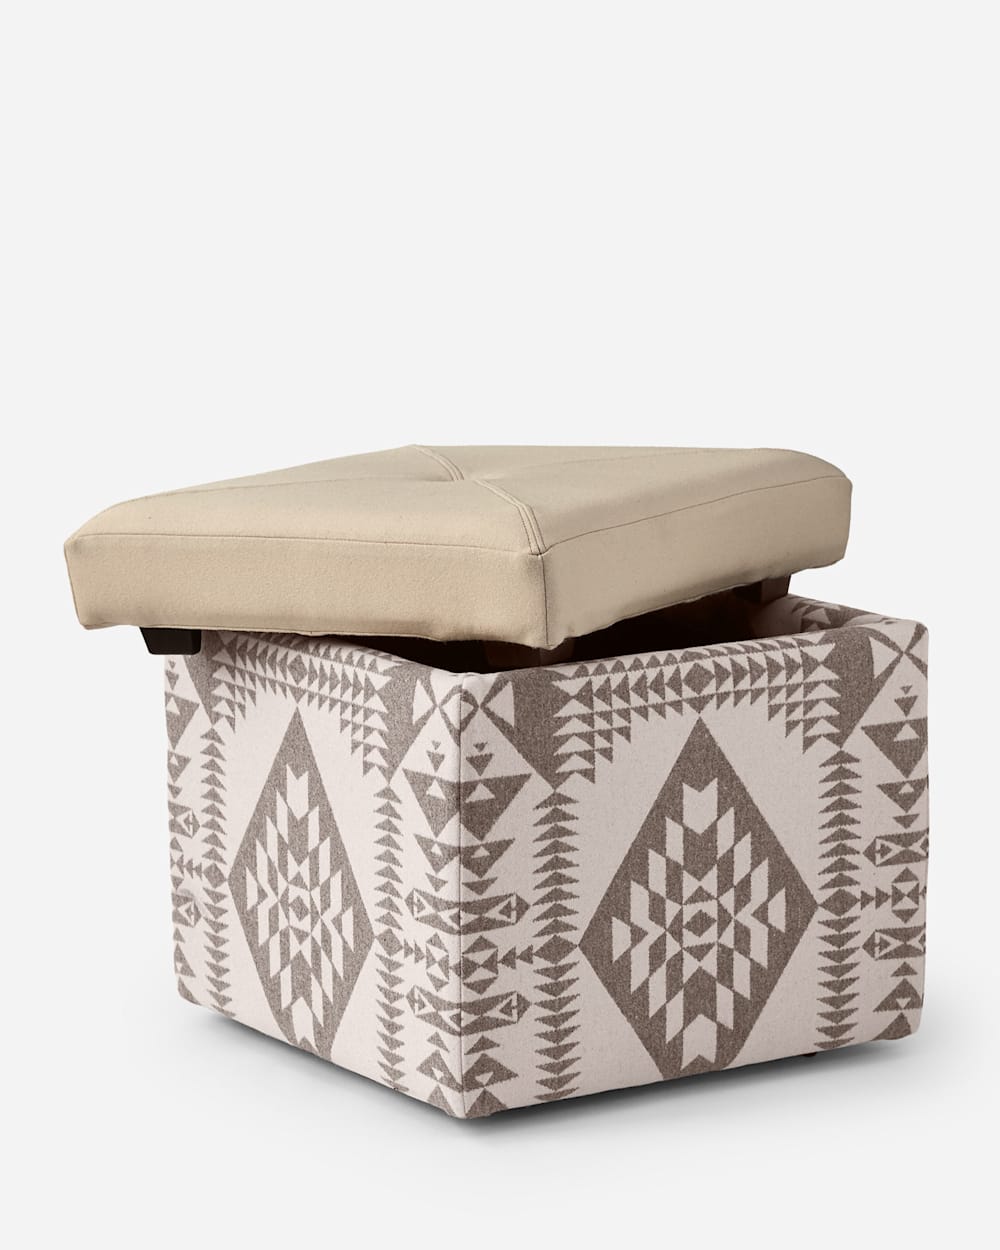 ADDITIONAL VIEW OF FANNIE KAY STORAGE OTTOMAN IN BASKETMAKER/DOE image number 2